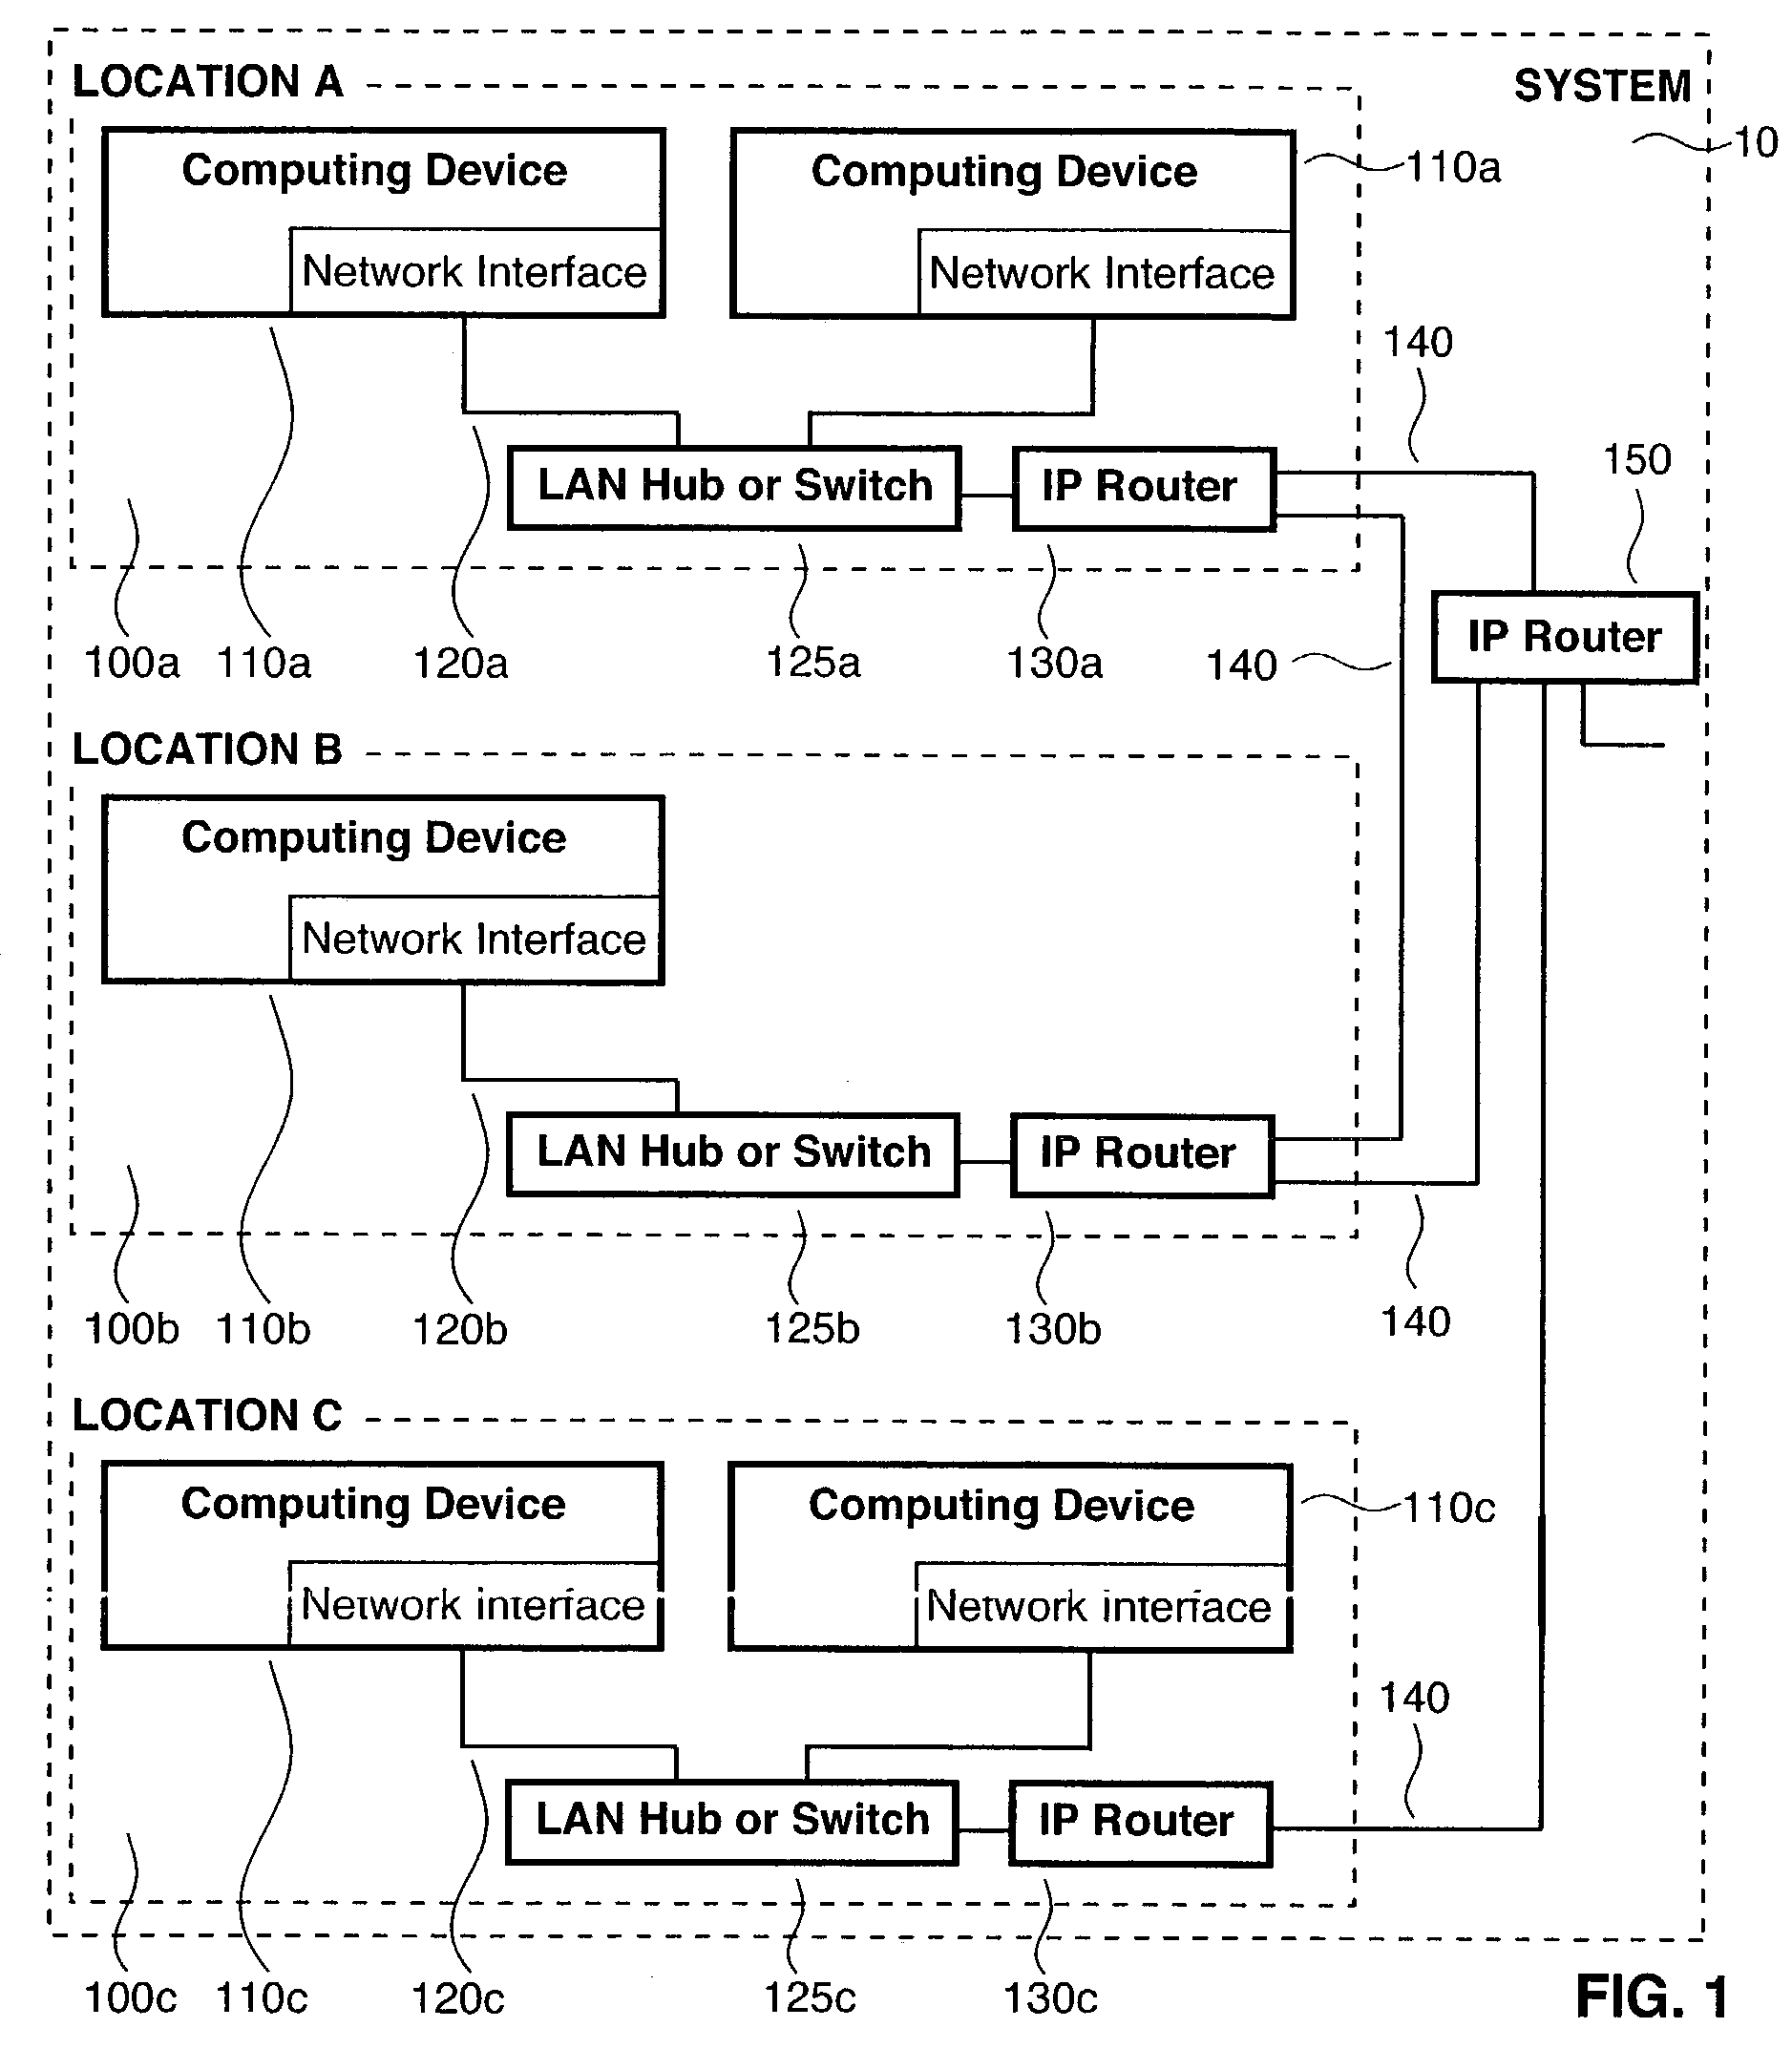 Method and apparatus for transmission and storage of digital medical data